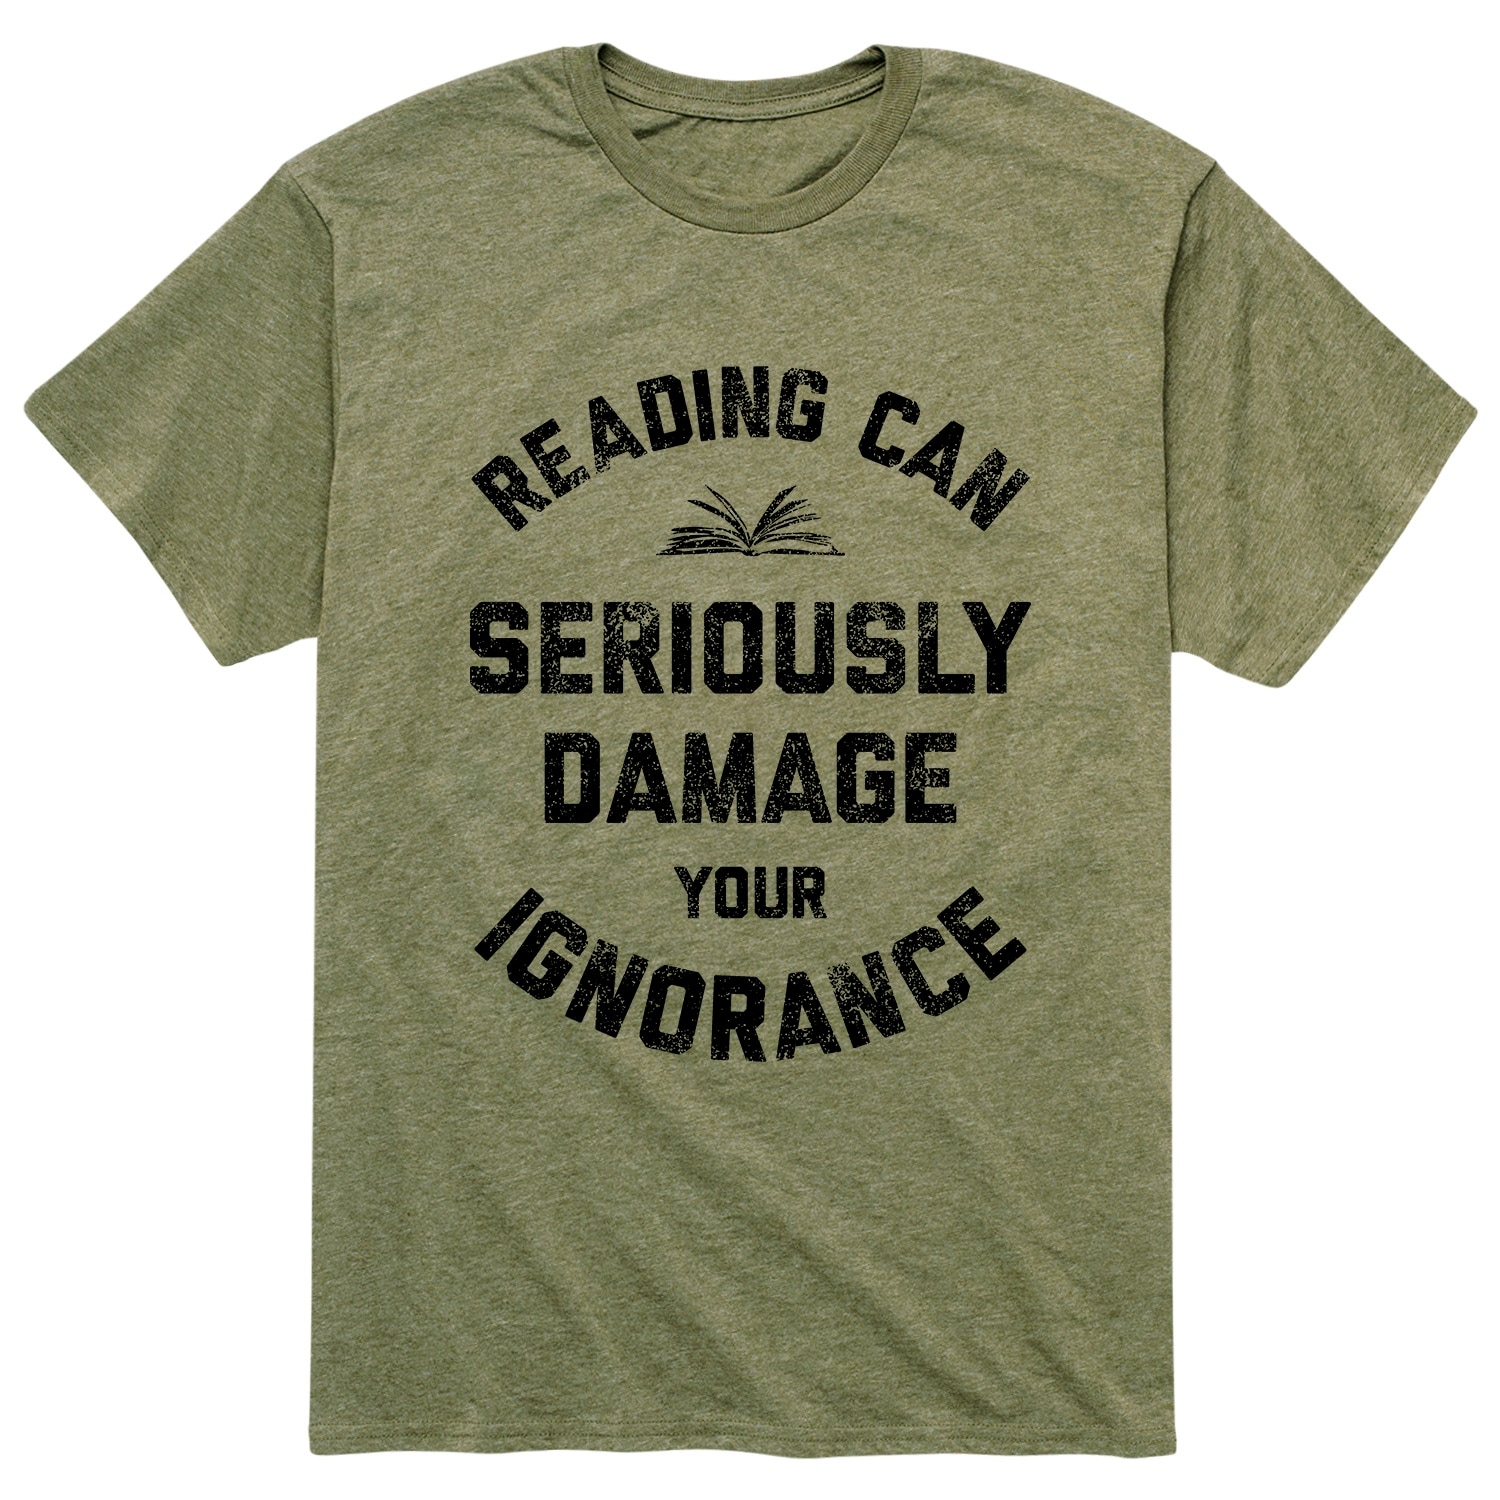 Reading Can Seriously Damage Your Ignorance - Adult Short Sleeve Tee